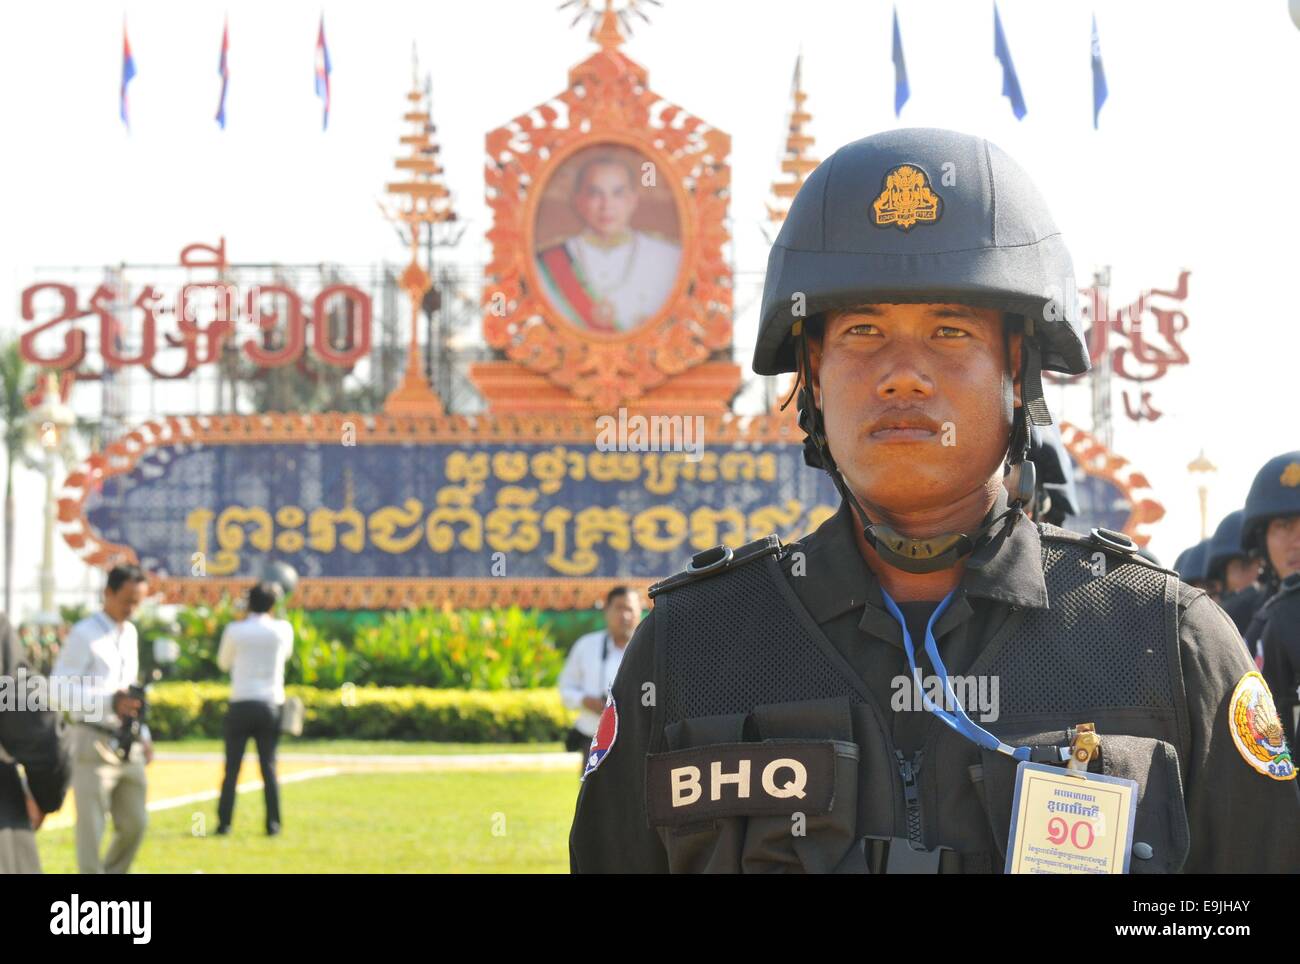 Phnom Penh. 29th Oct, 2014. A soldier takes part in the celebration for the 10th anniversary of Cambodian King Norodom Sihamoni's coronation in Phnom Penh Oct. 29, 2014. Cambodia on Wednesday celebrated the 10th anniversary of King Norodom Sihamoni's coronation, urging people to continue uniting for national peace and development. Credit:  Sovannara/Xinhua/Alamy Live News Stock Photo